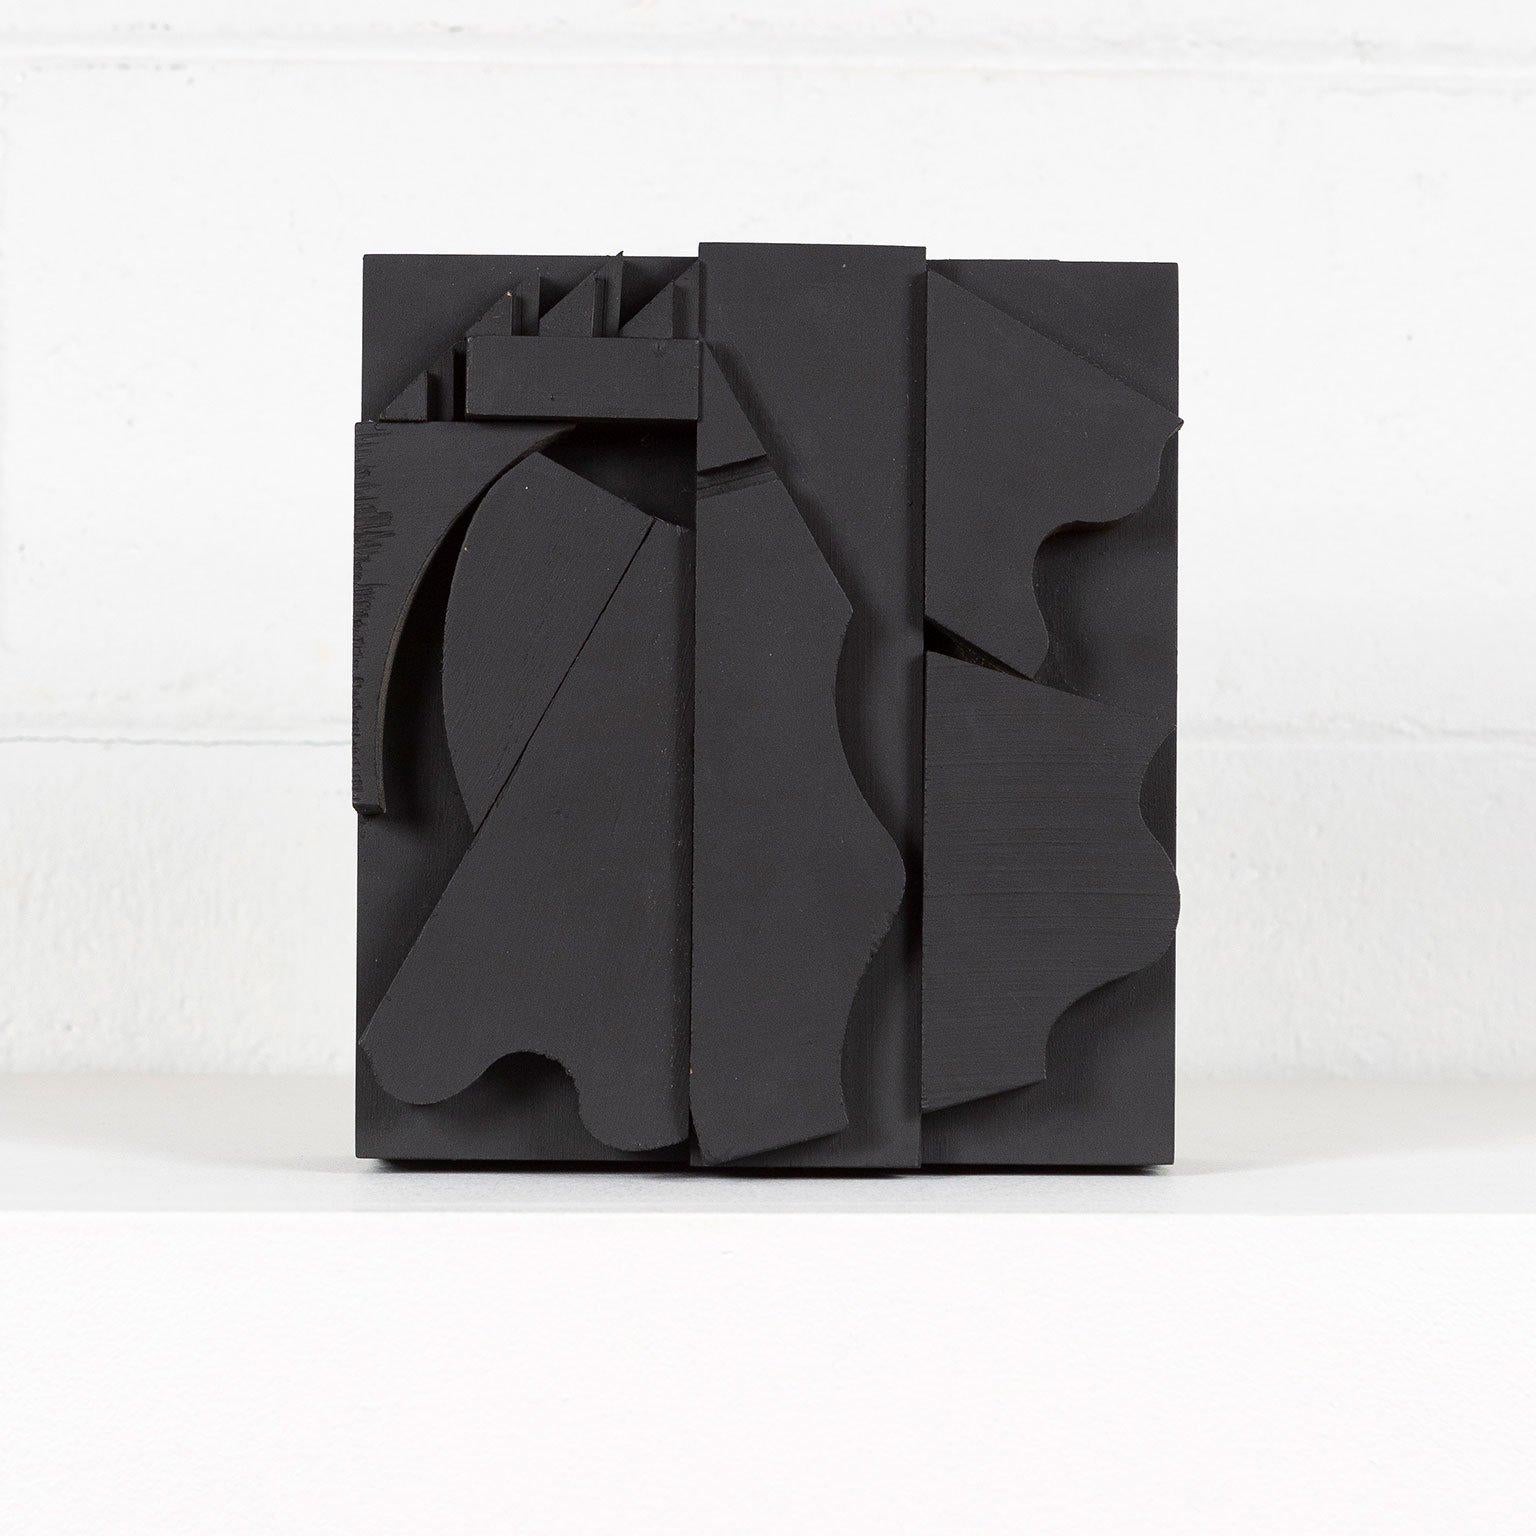 Dark Cryptic - Sculpture by Louise Nevelson